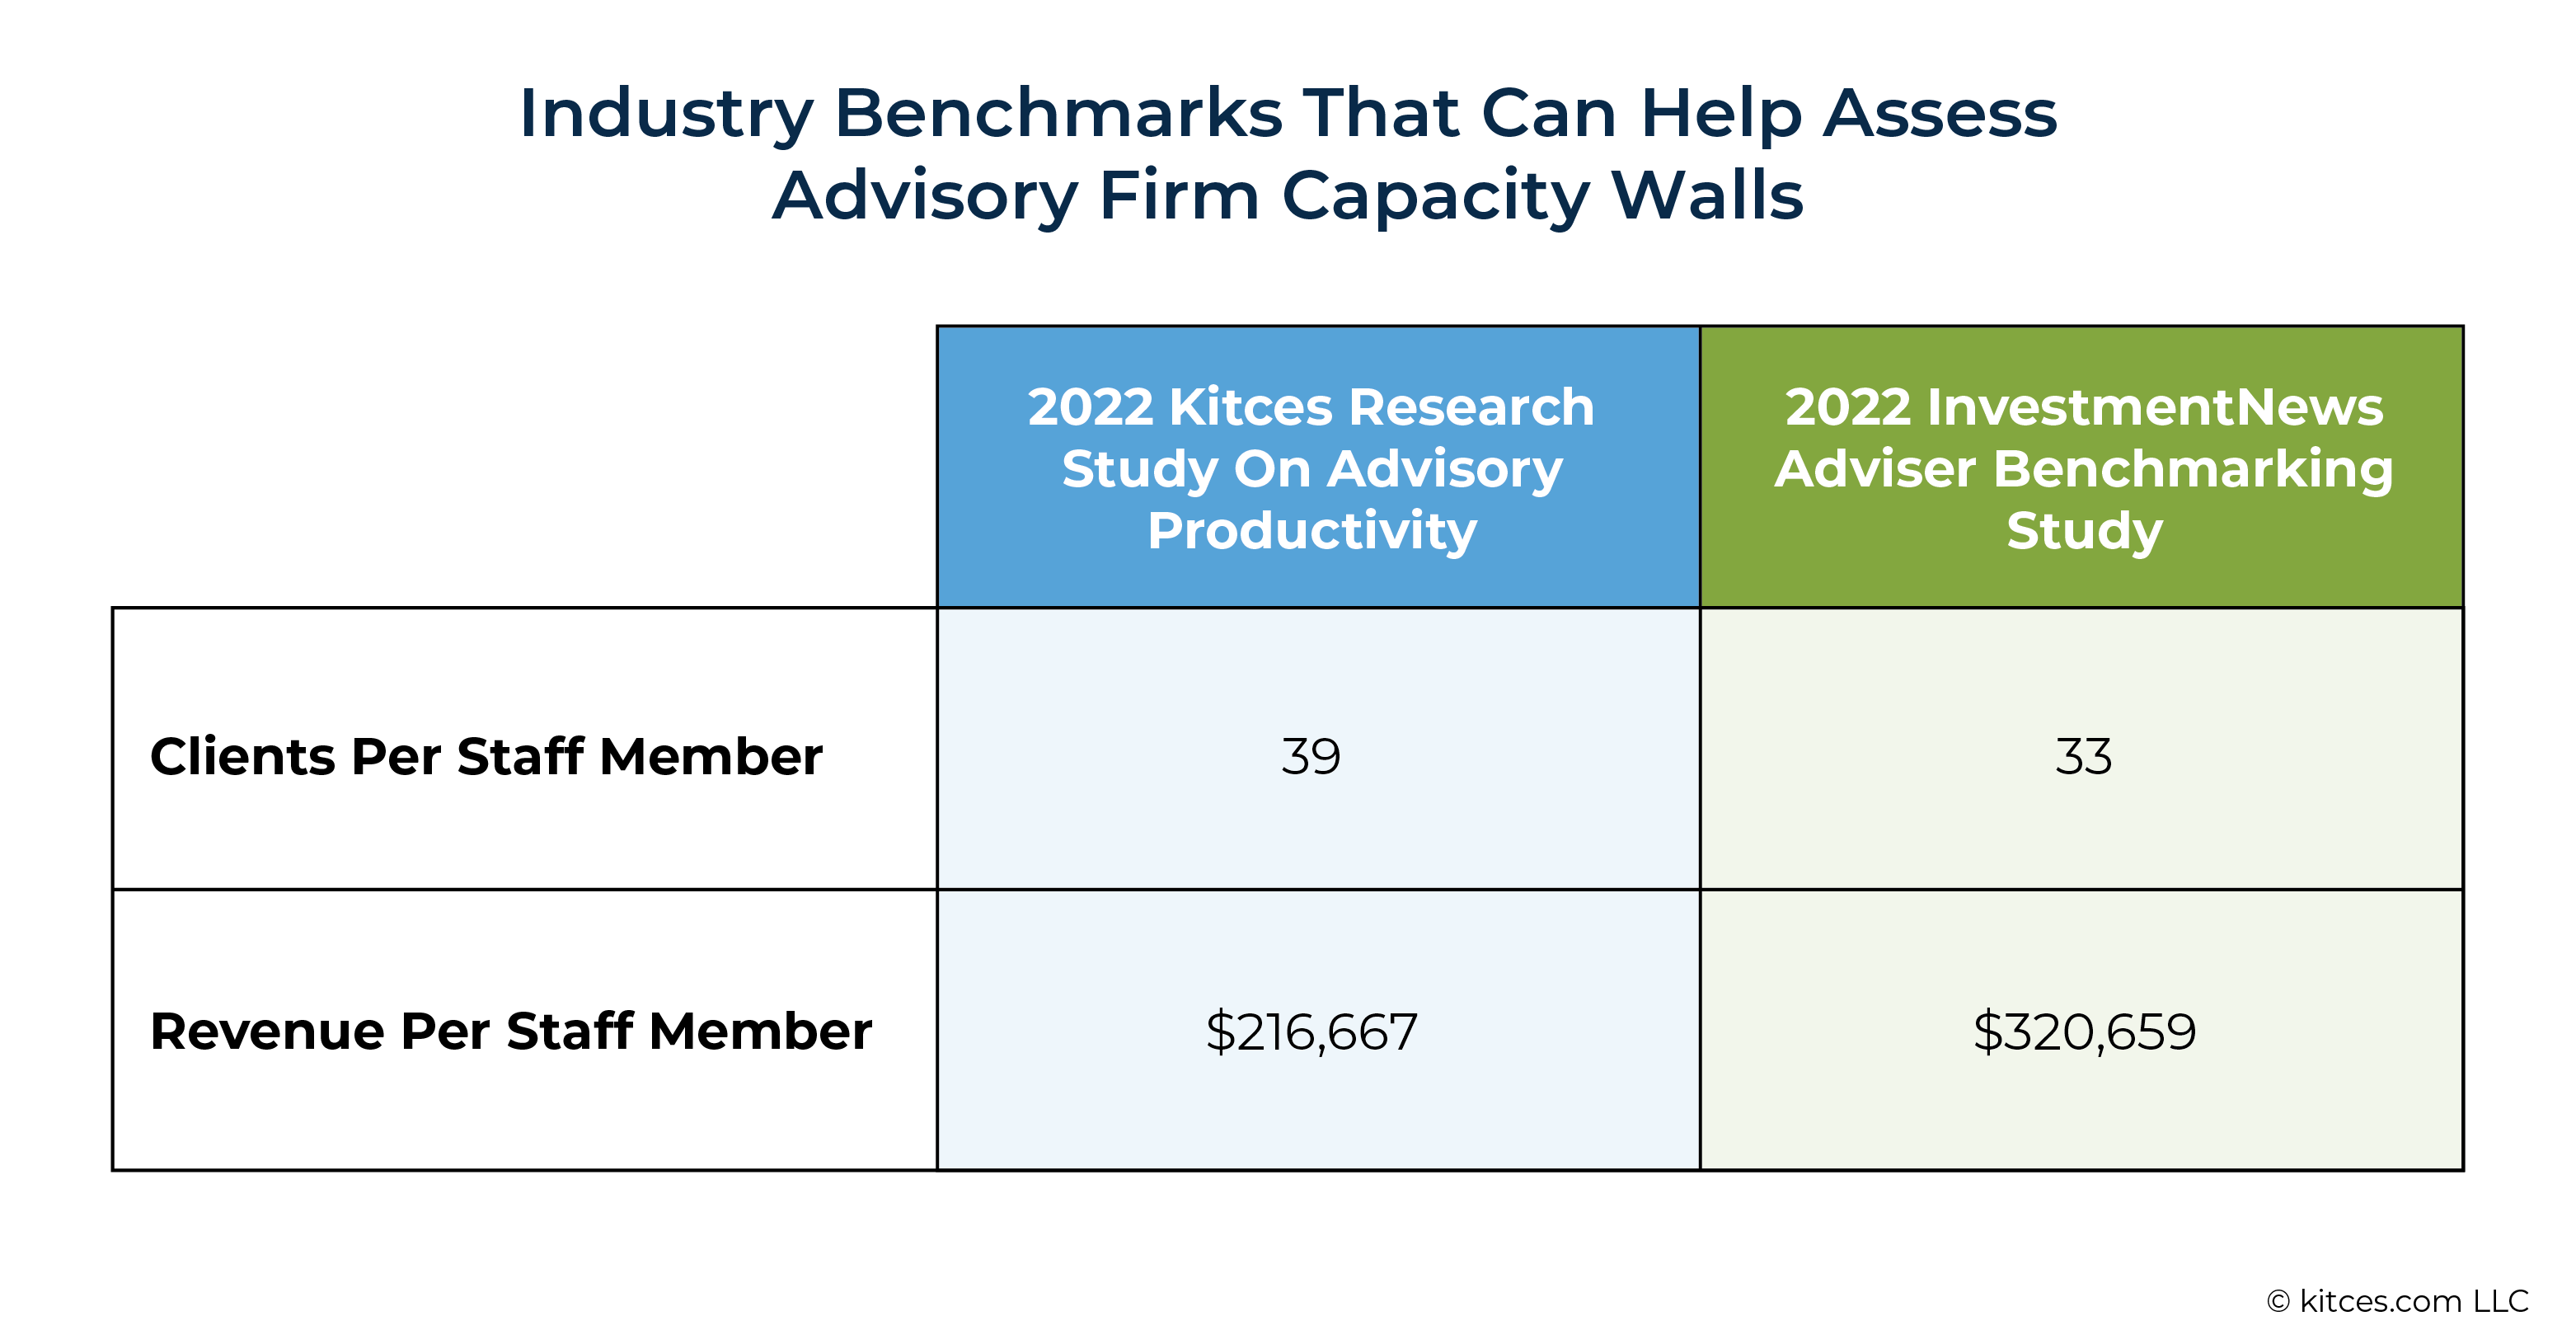 Industry Benchmarks That Can Help Assess Advisory Firm Capacity Walls